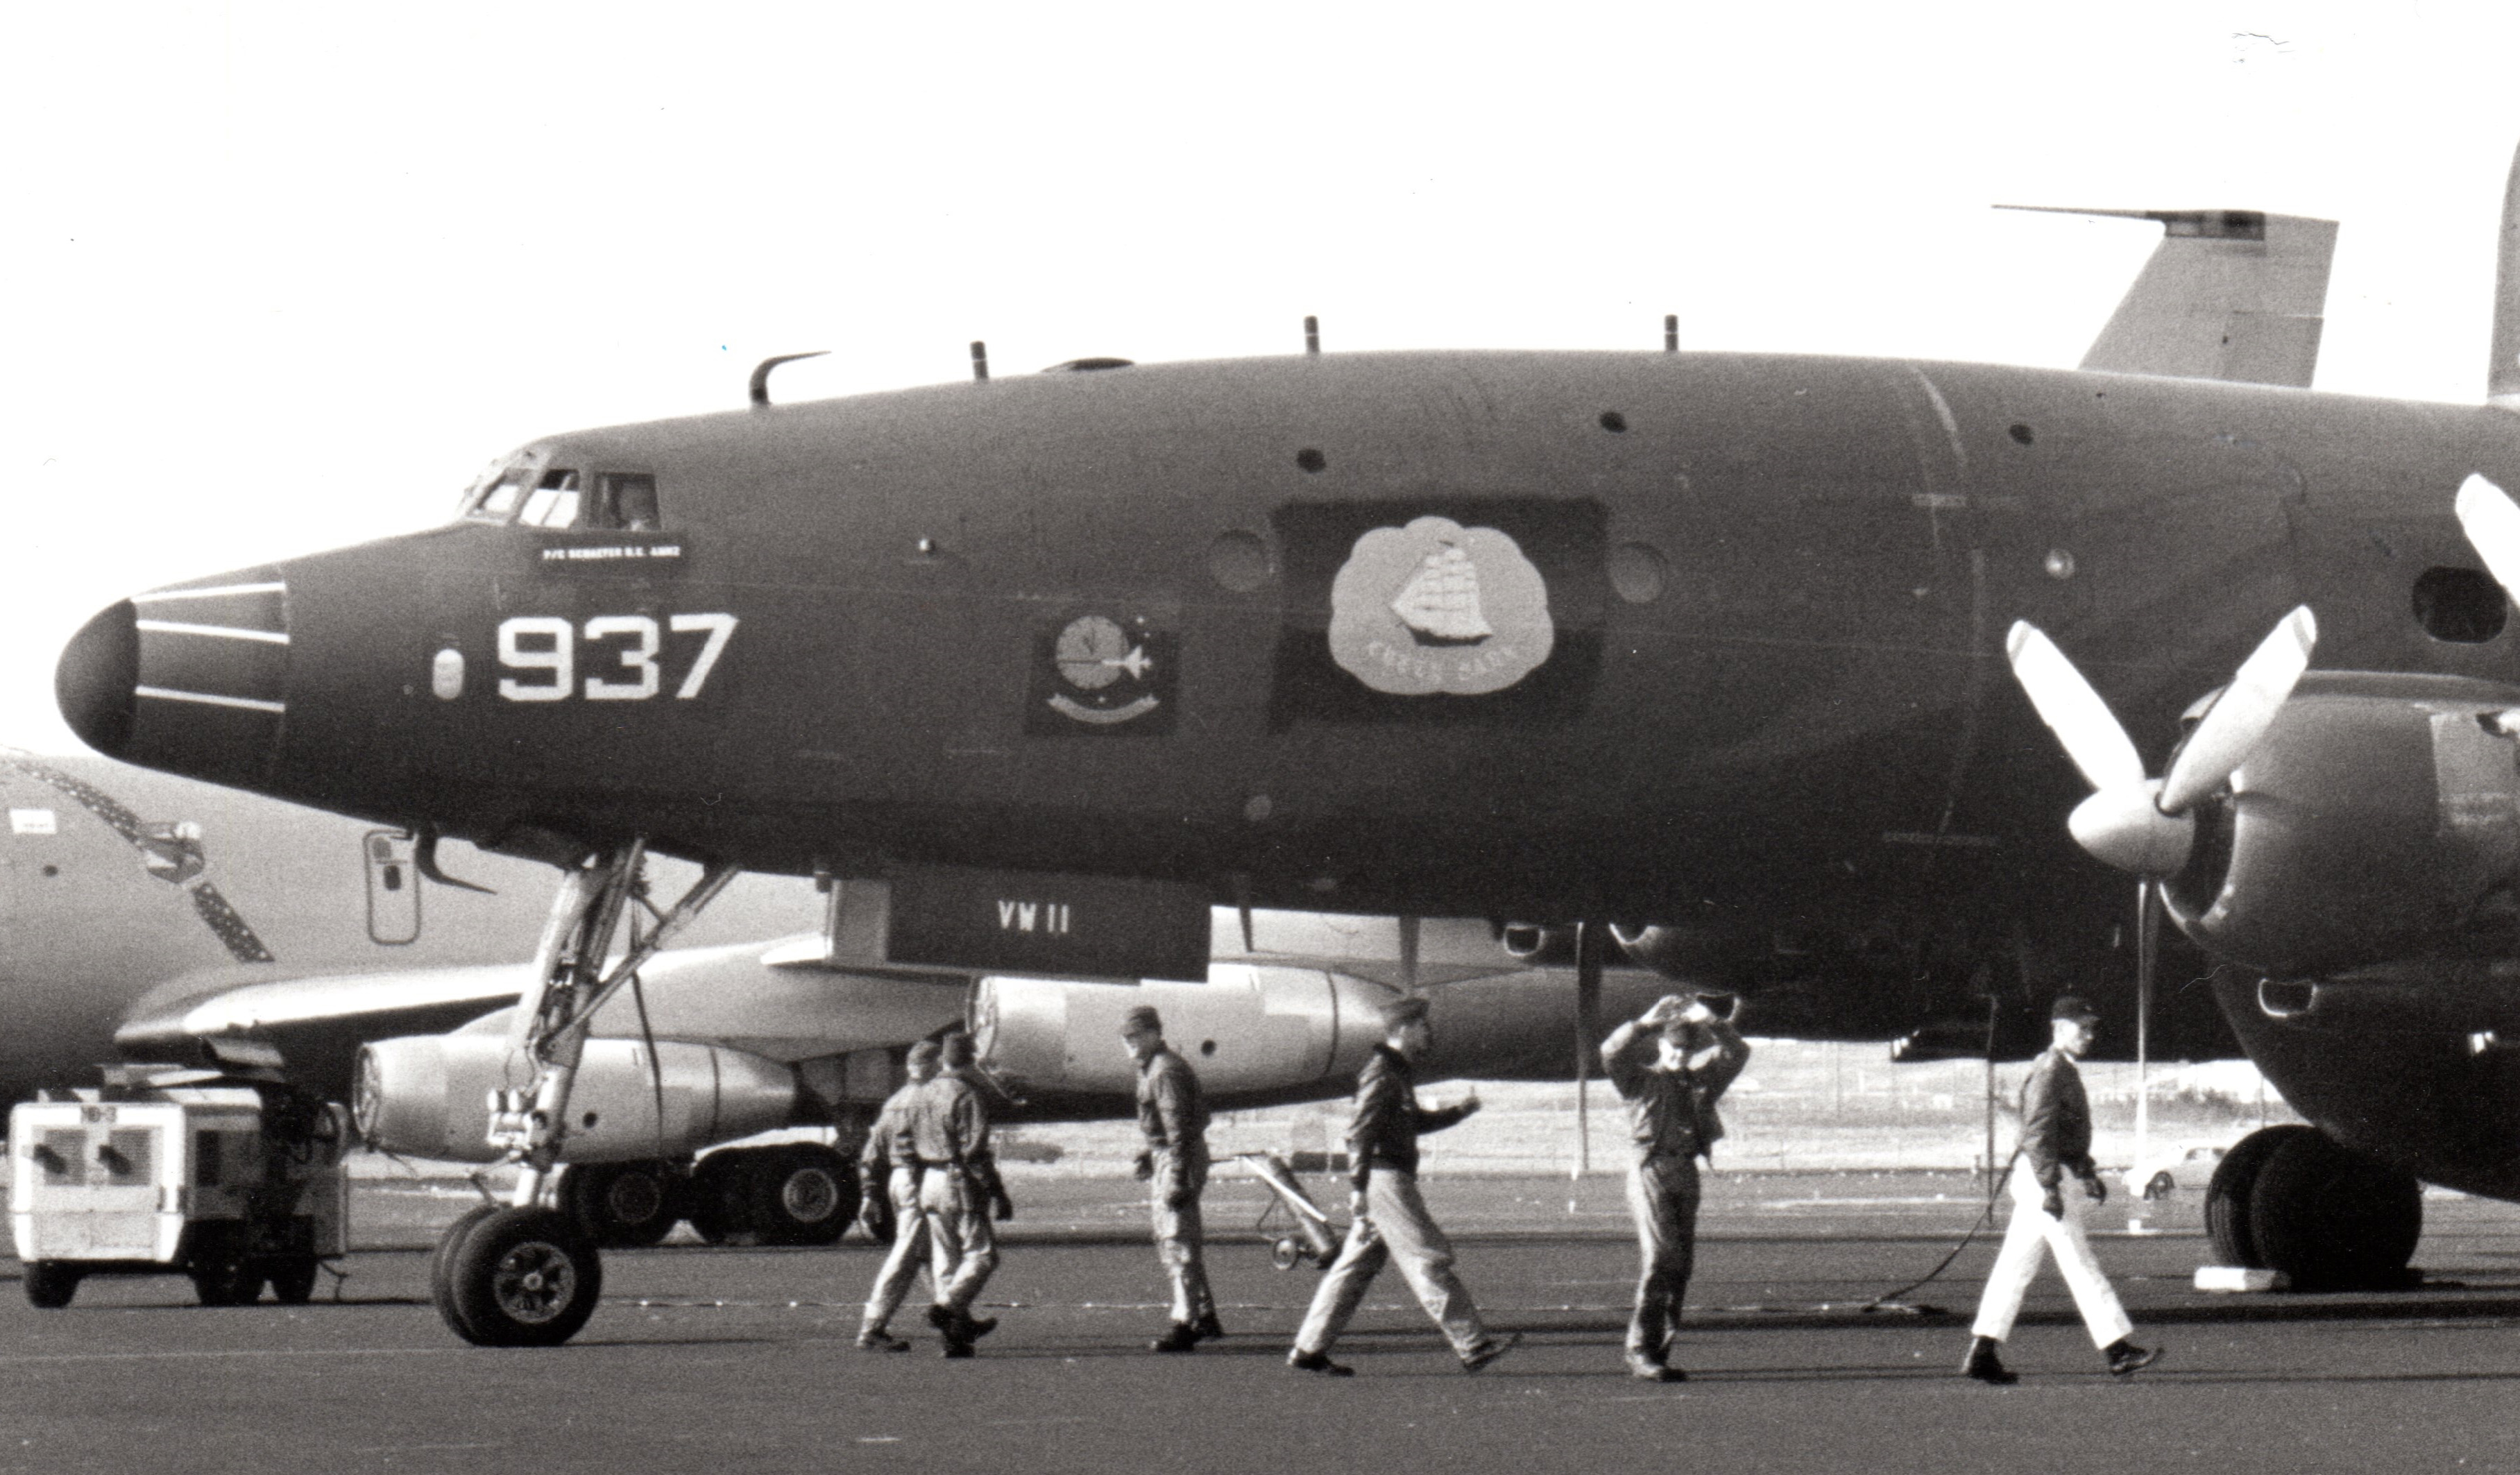 One of VW-11's Lockheed WV-2 Super Constellations at Ernest Harmon AFB in Newfoundland during an Open Day in 1965. (photo by Will Tate)